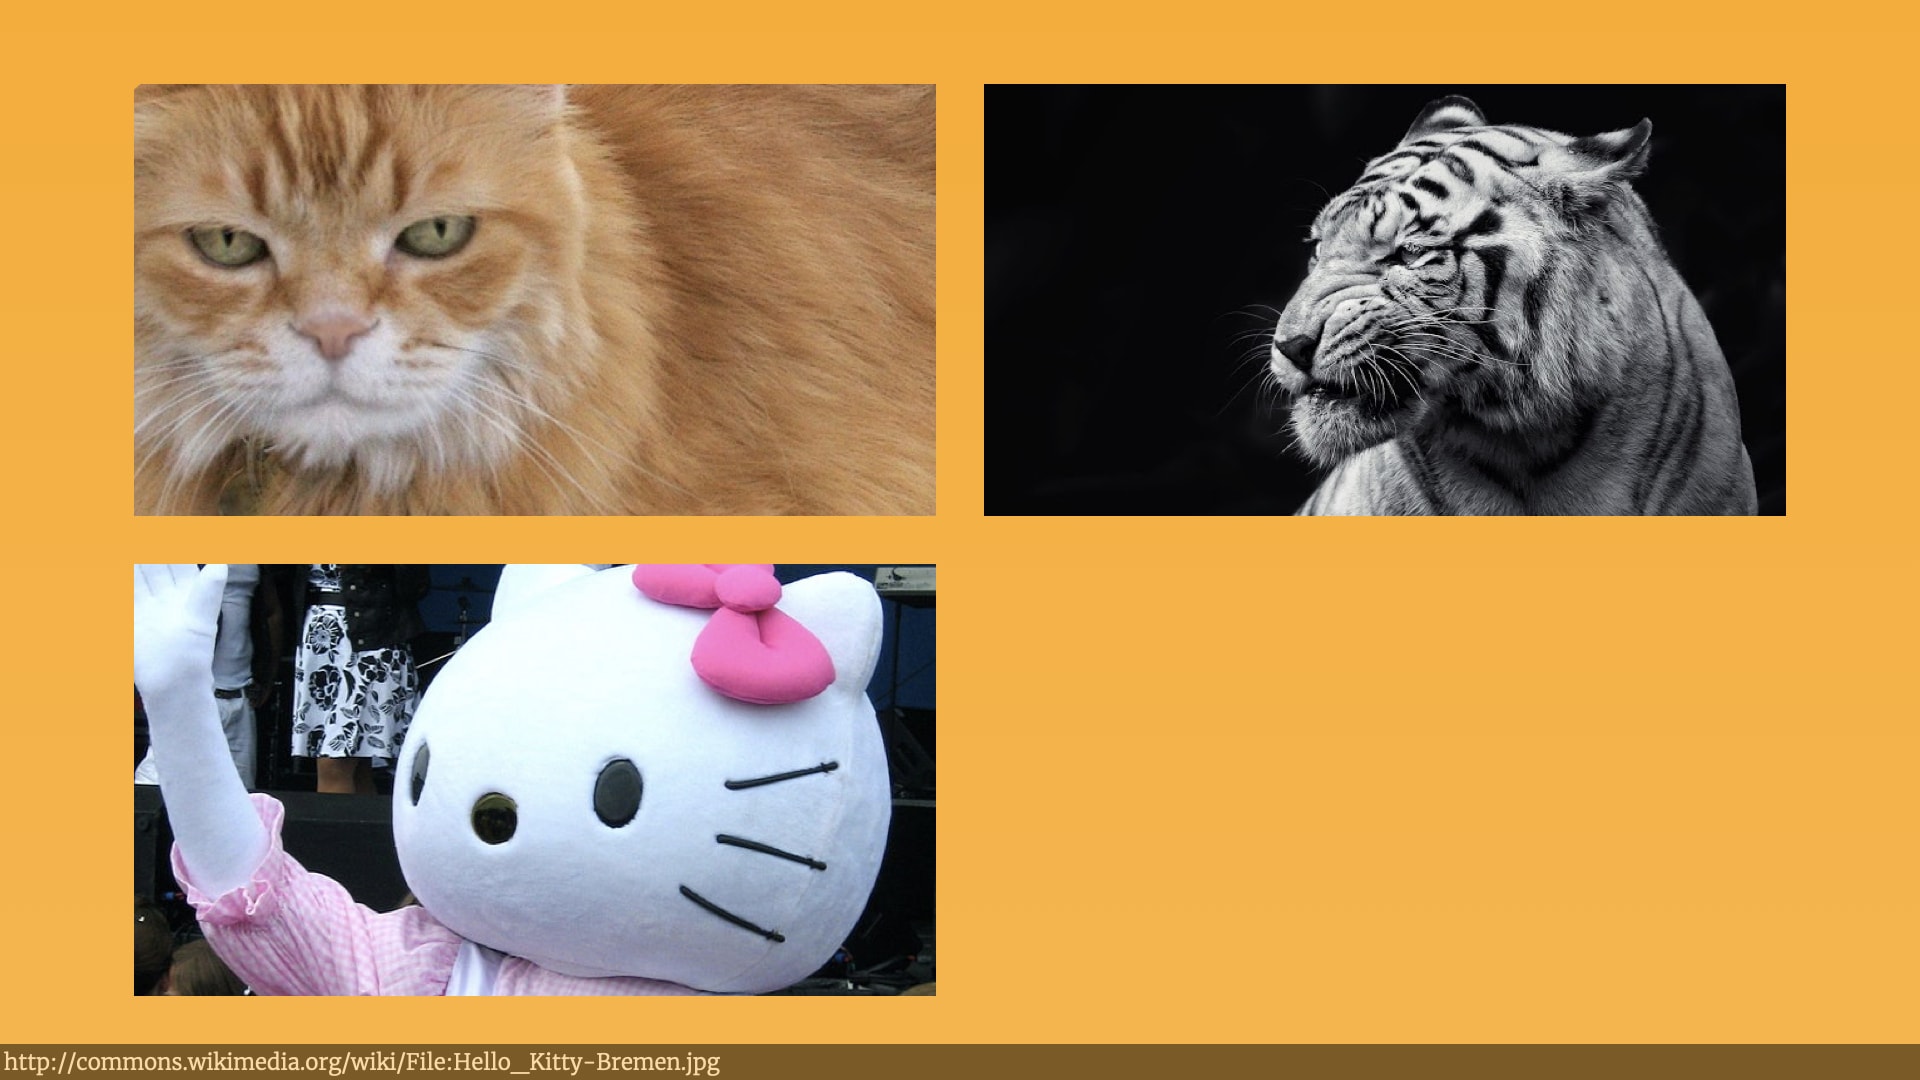 The photos of a ginger house cat and a tiger are joined by a photo of somebody dressed up as Hello Kitty.